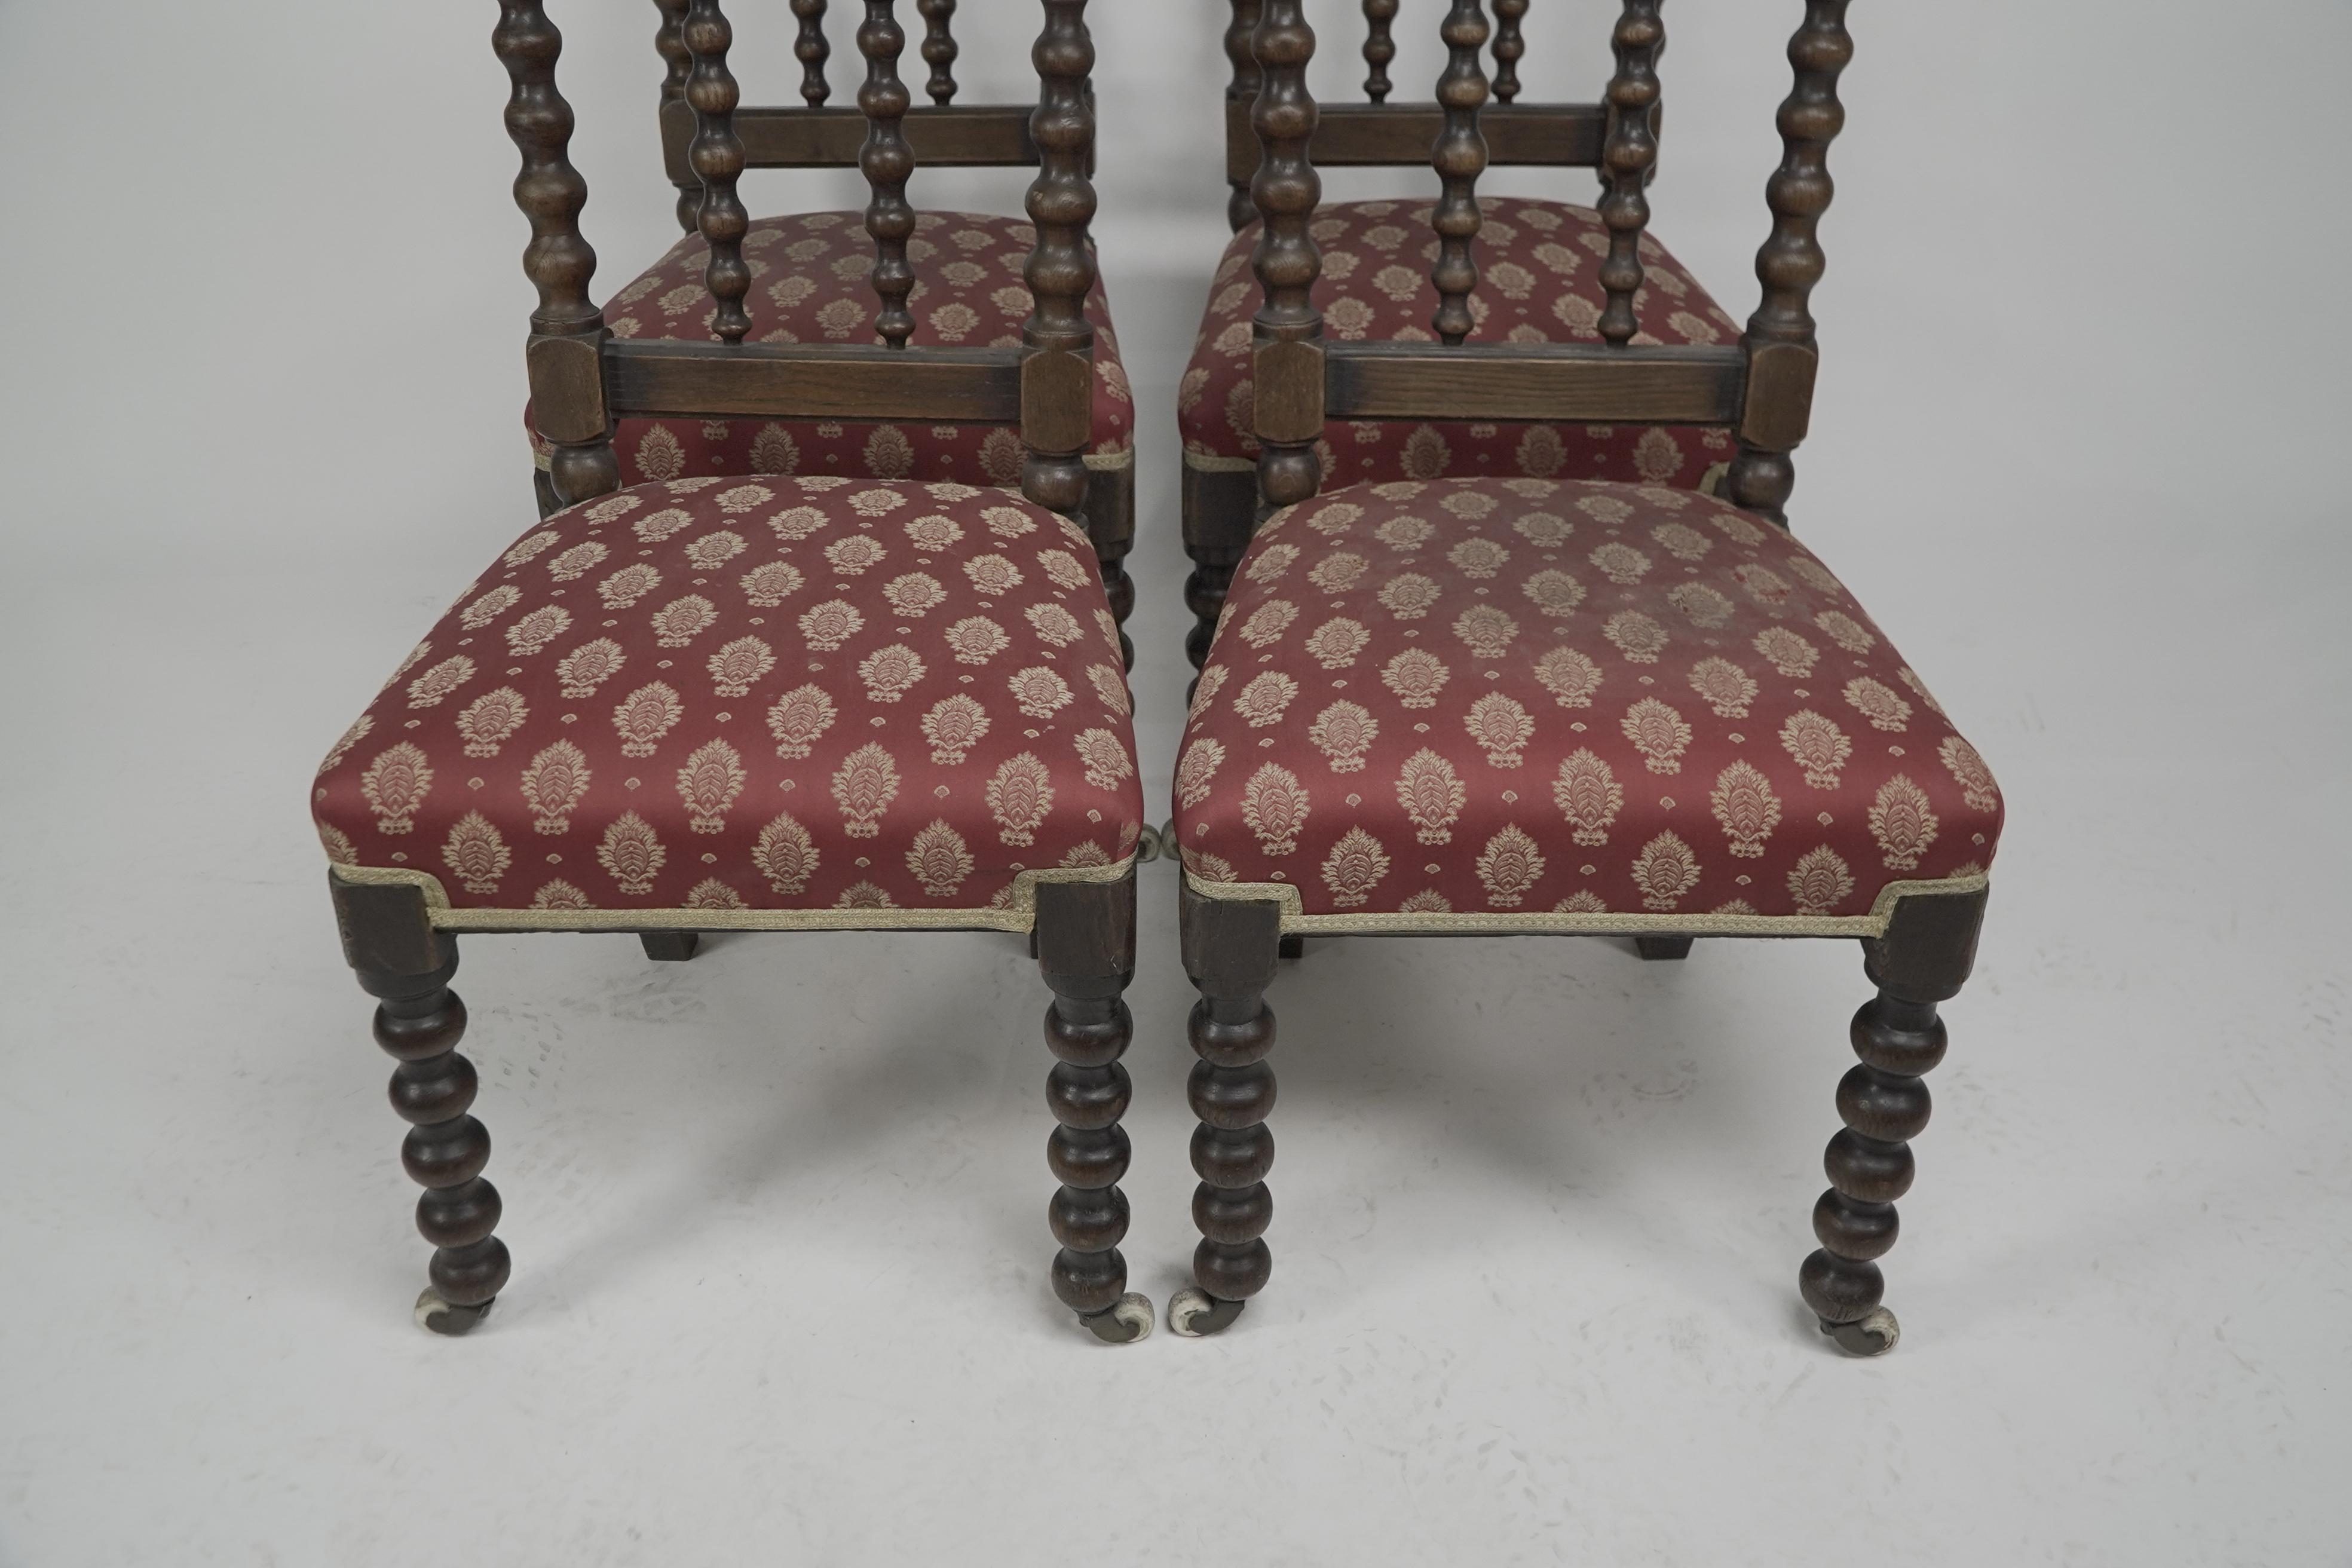 A good quality set of four Gothic Revival oak dining chairs with twin pierced quatrefoil details to the arched top and bobbin turned legs with original brass and white ceramic castors. Professionally reupholstered.
